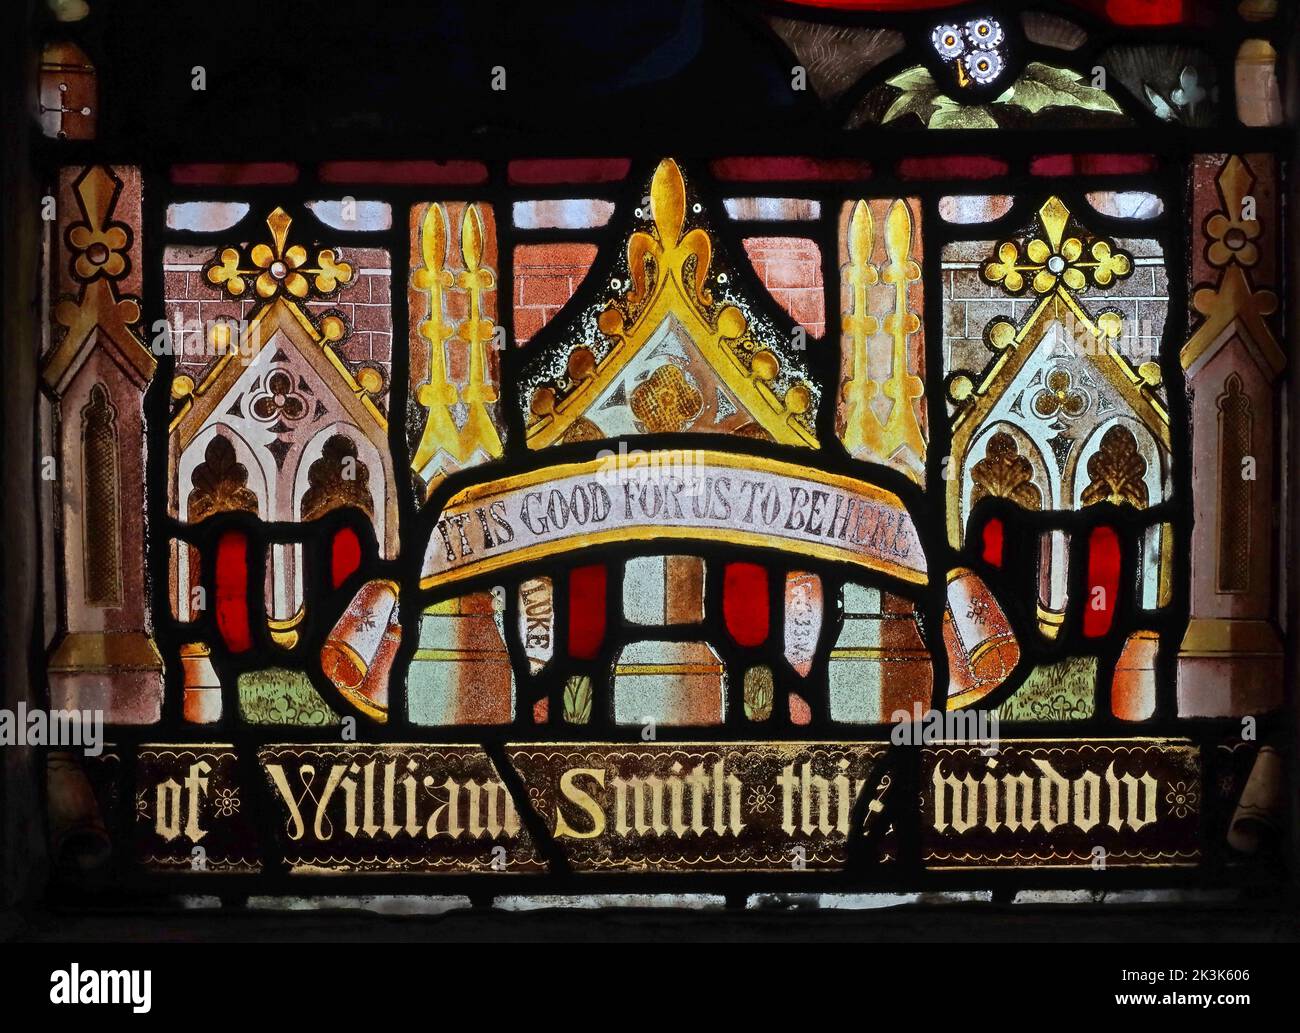 William Smith stained glass window, St Marys church, Kirkgate, Tadcaster, Yorkshire, England, UK, LS24 9BL Stock Photo